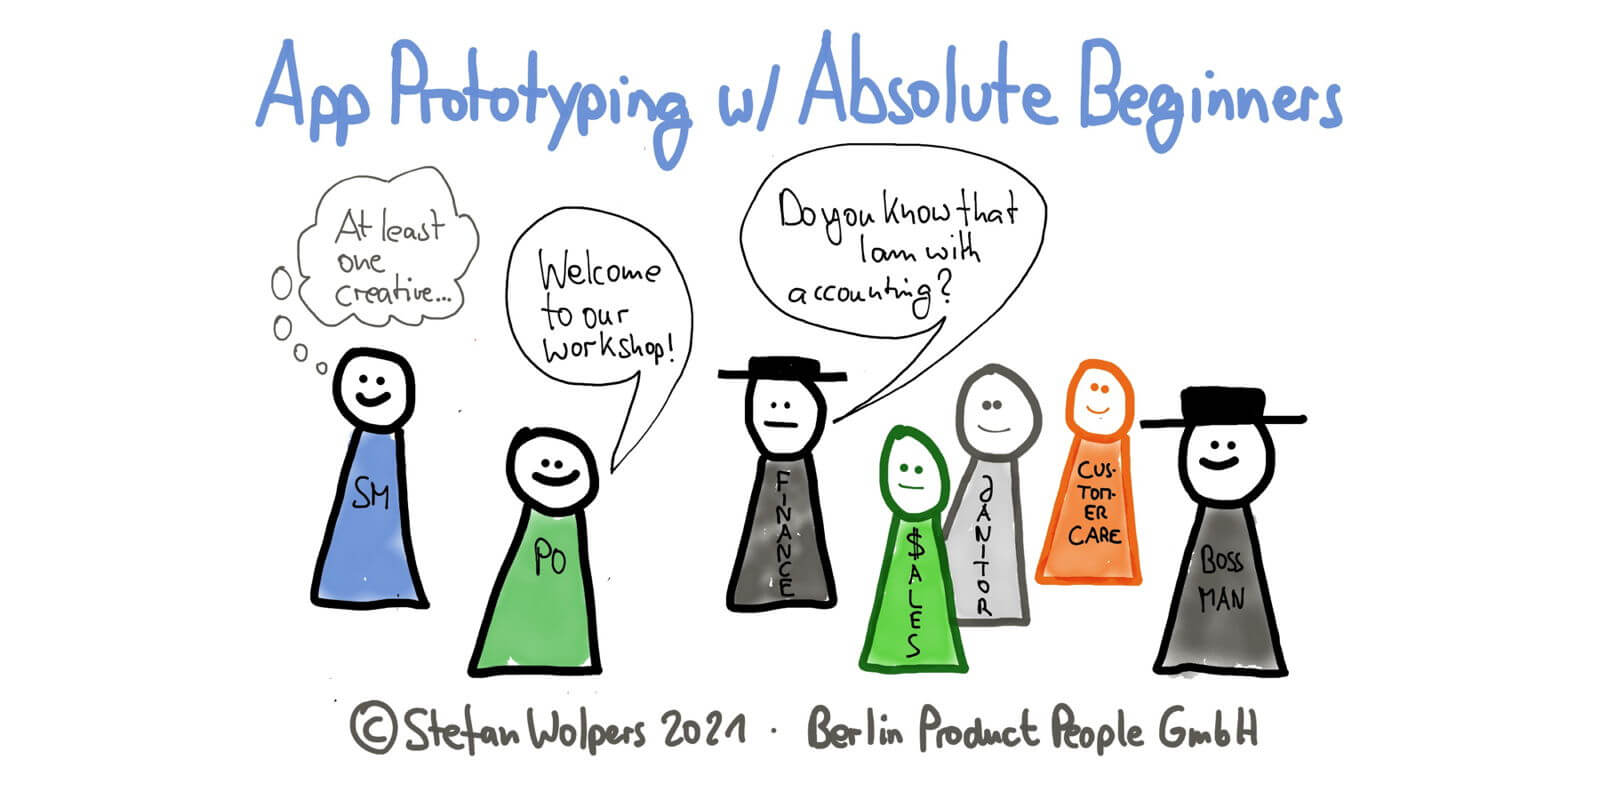 App Prototyping with Absolute Beginners – Creating a Shared Understanding of How Empiricism Works — Berlin Product People GmbH